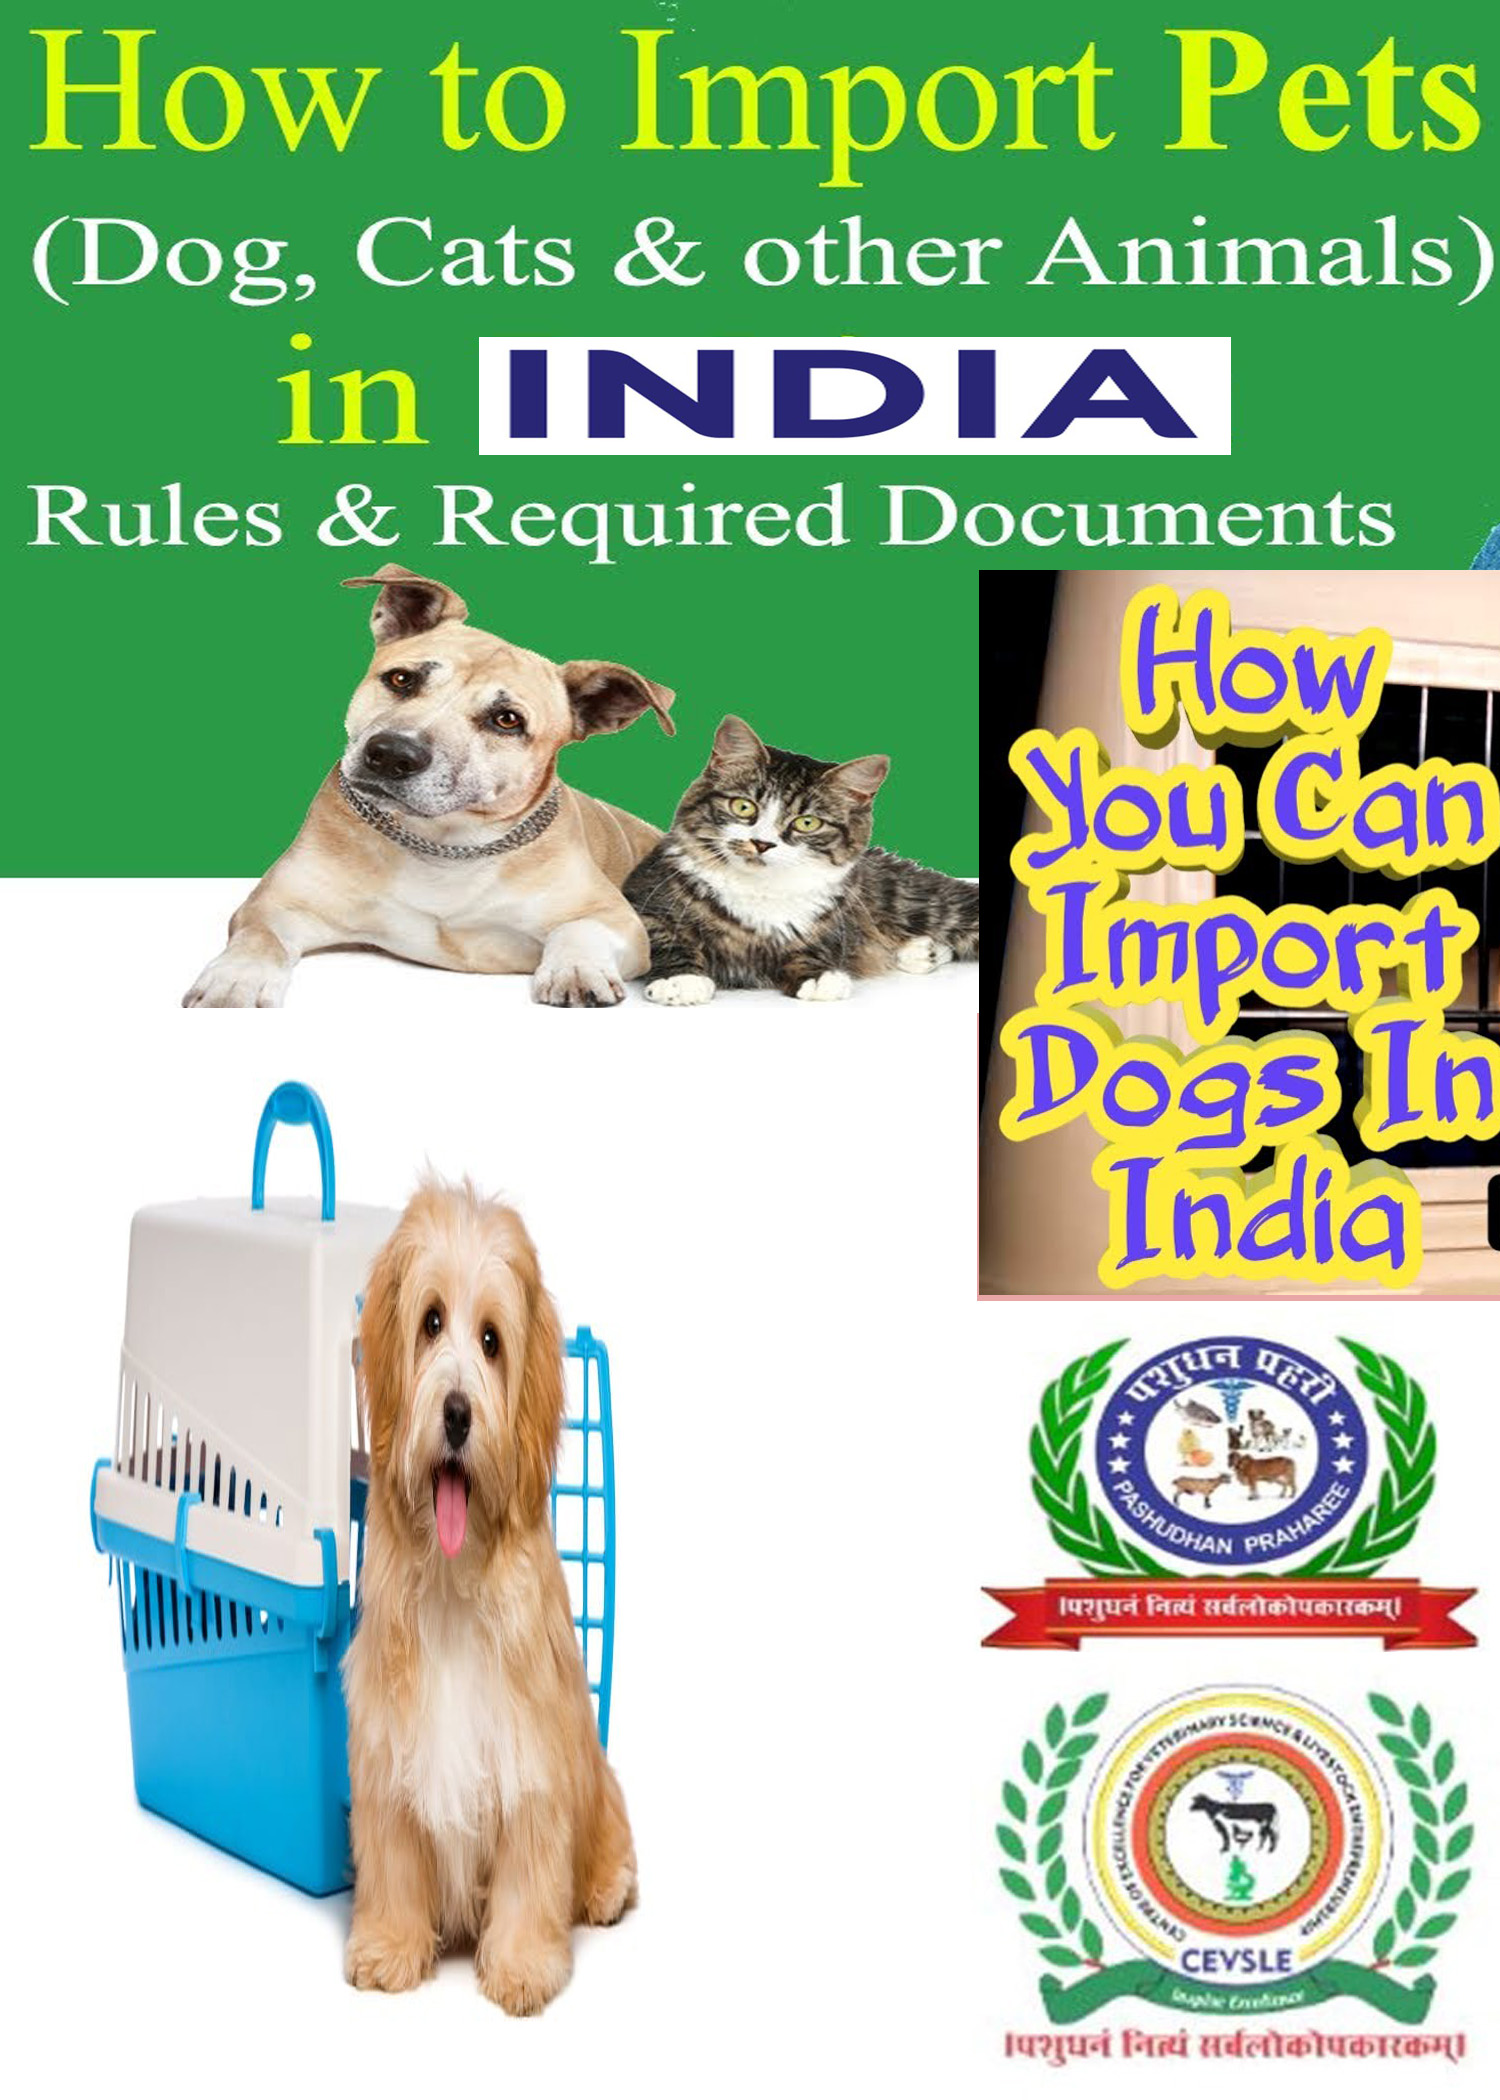 GOVT. REGULATIONS TO IMPORT PETS IN INDIA